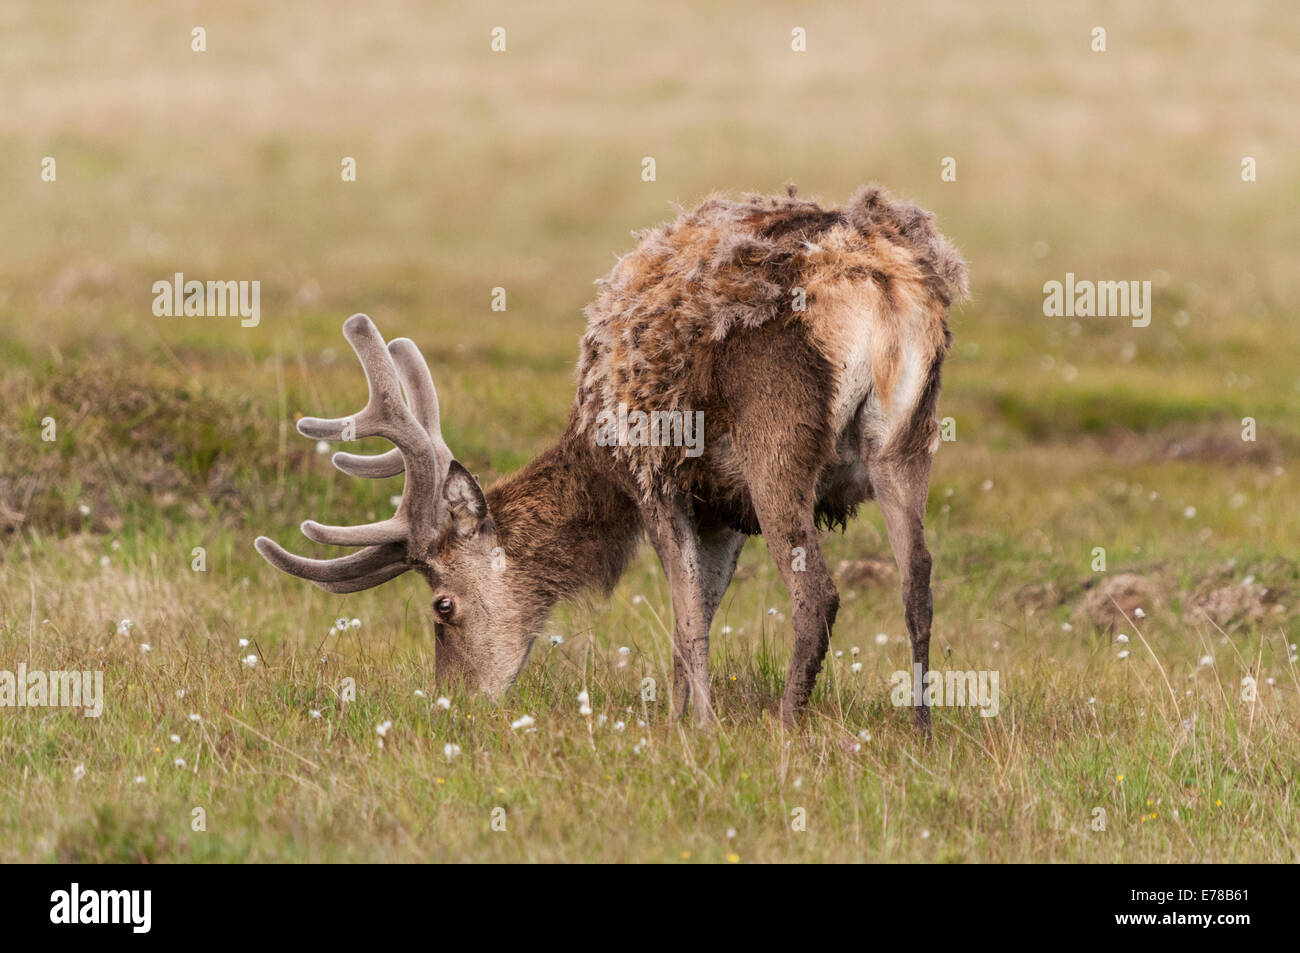 A Red Deer Stag, Cervus elaphus, with antlers covered in velvet, feeding in a field on the Isle of Islay Scotland Stock Photo